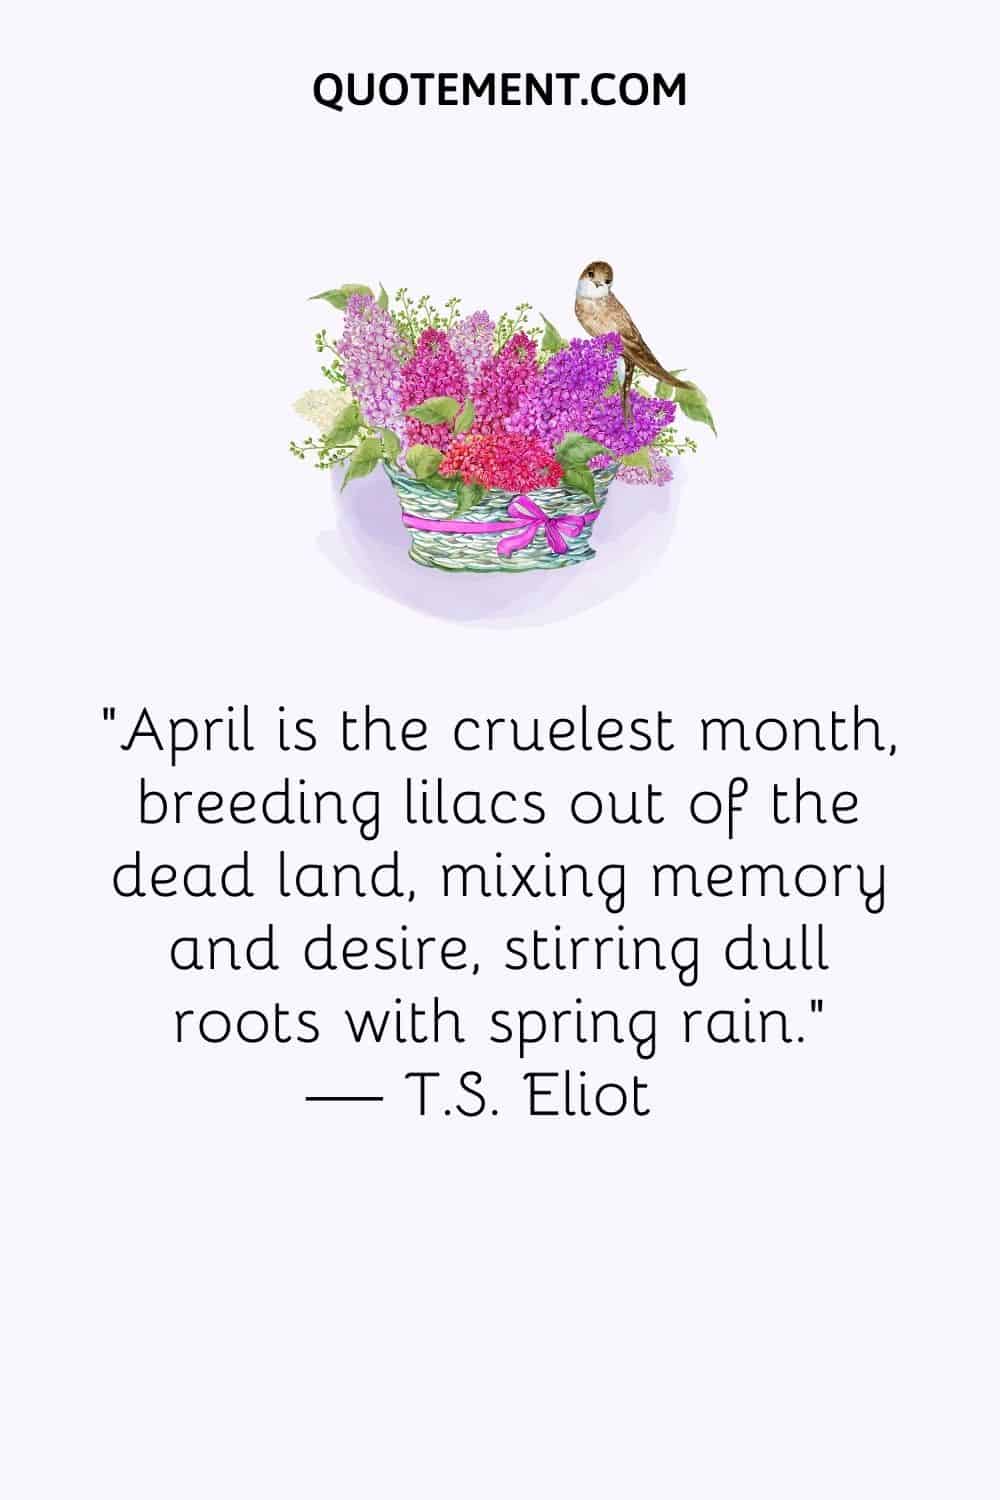 April is the cruelest month, breeding lilacs out of the dead land, mixing memory and desire, stirring dull roots with spring rain